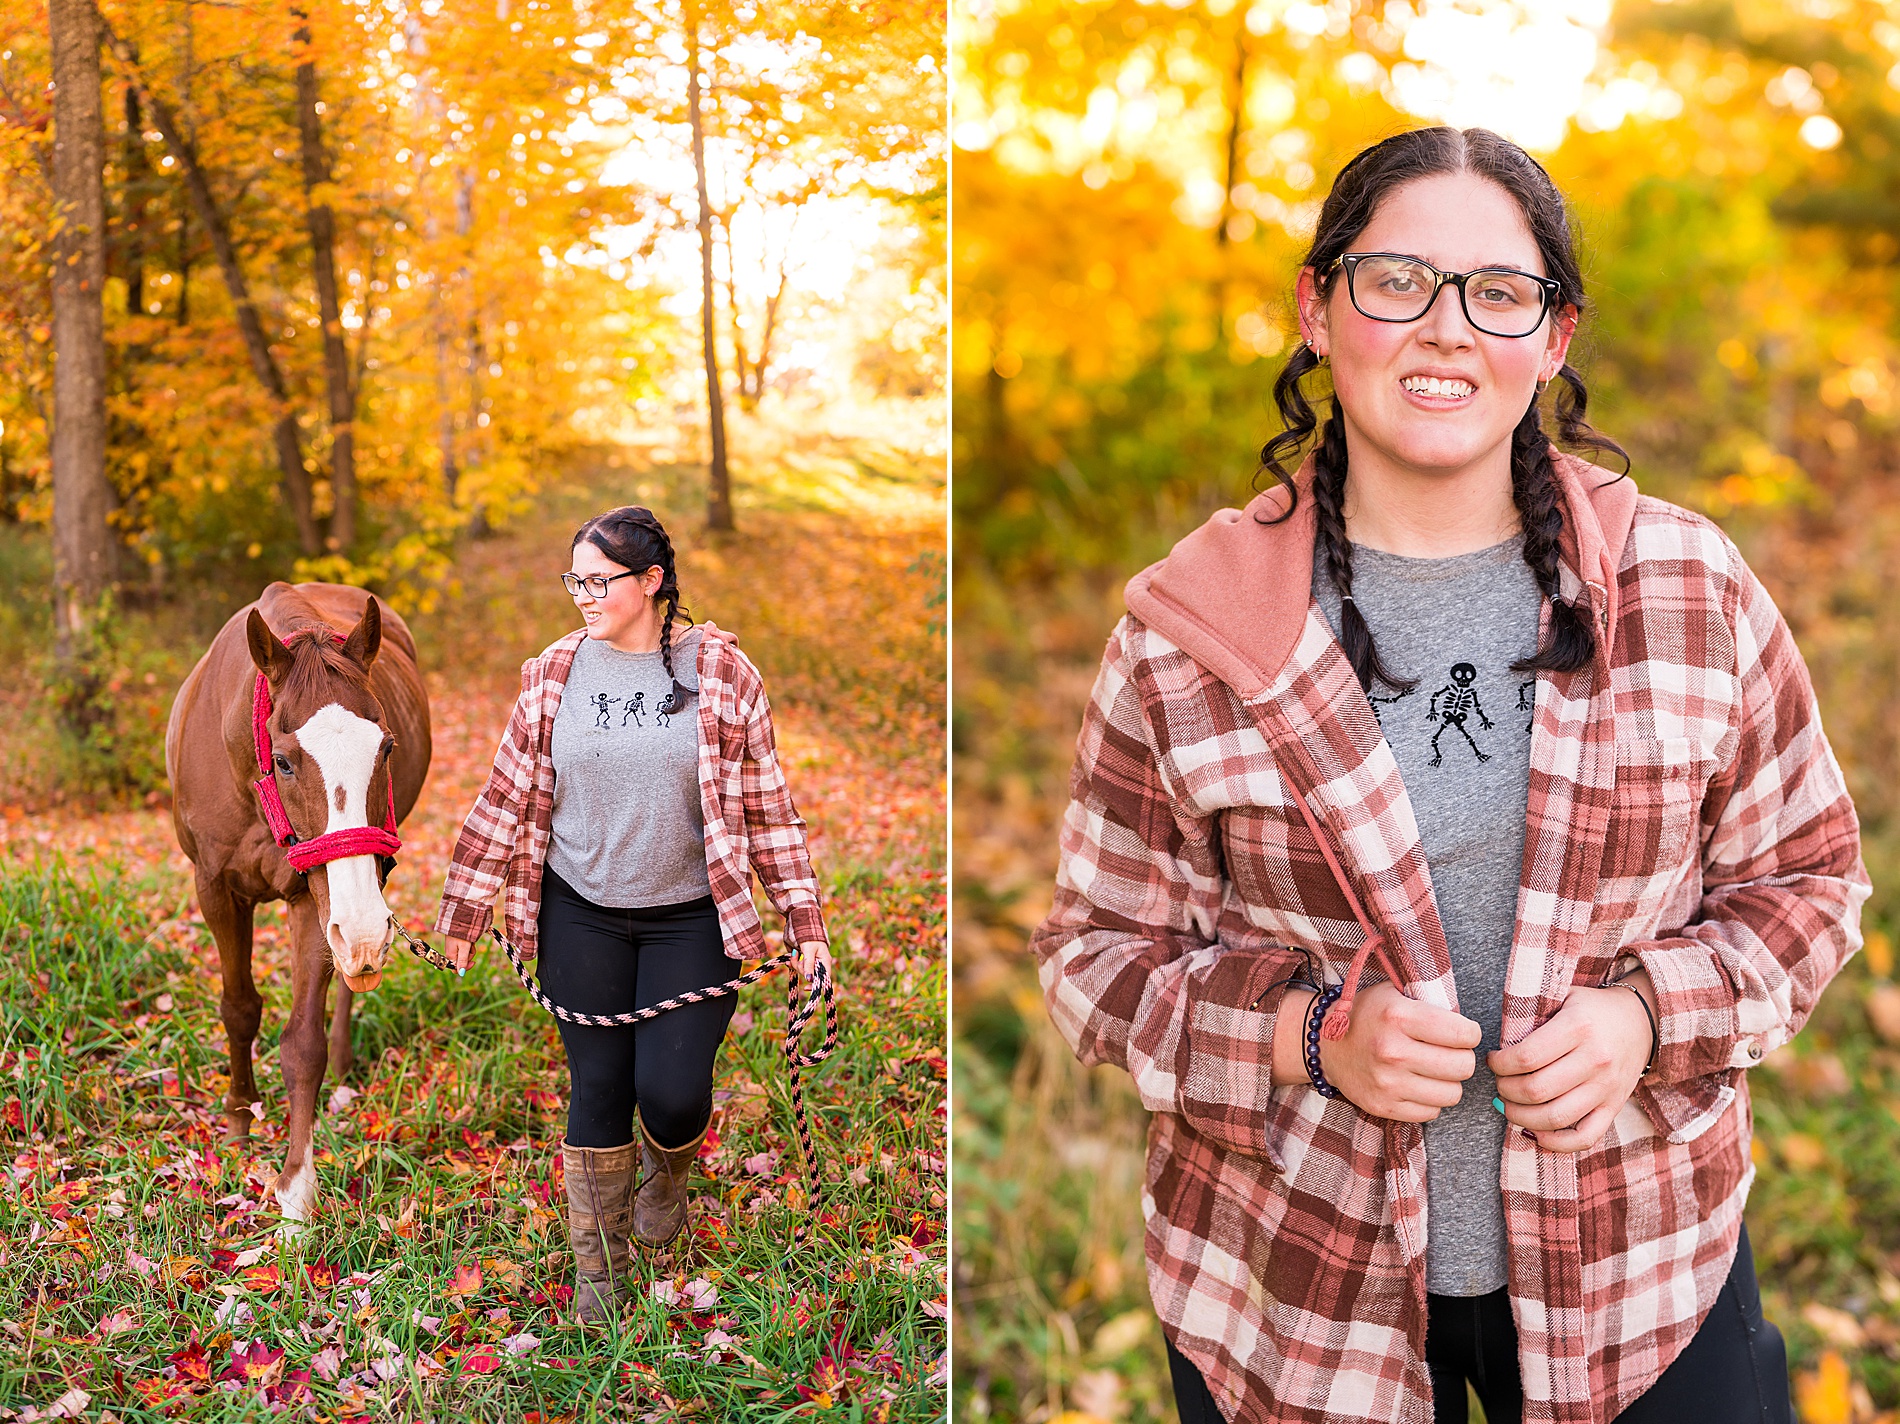 Senior walks with horse during her equestrian themed senior session